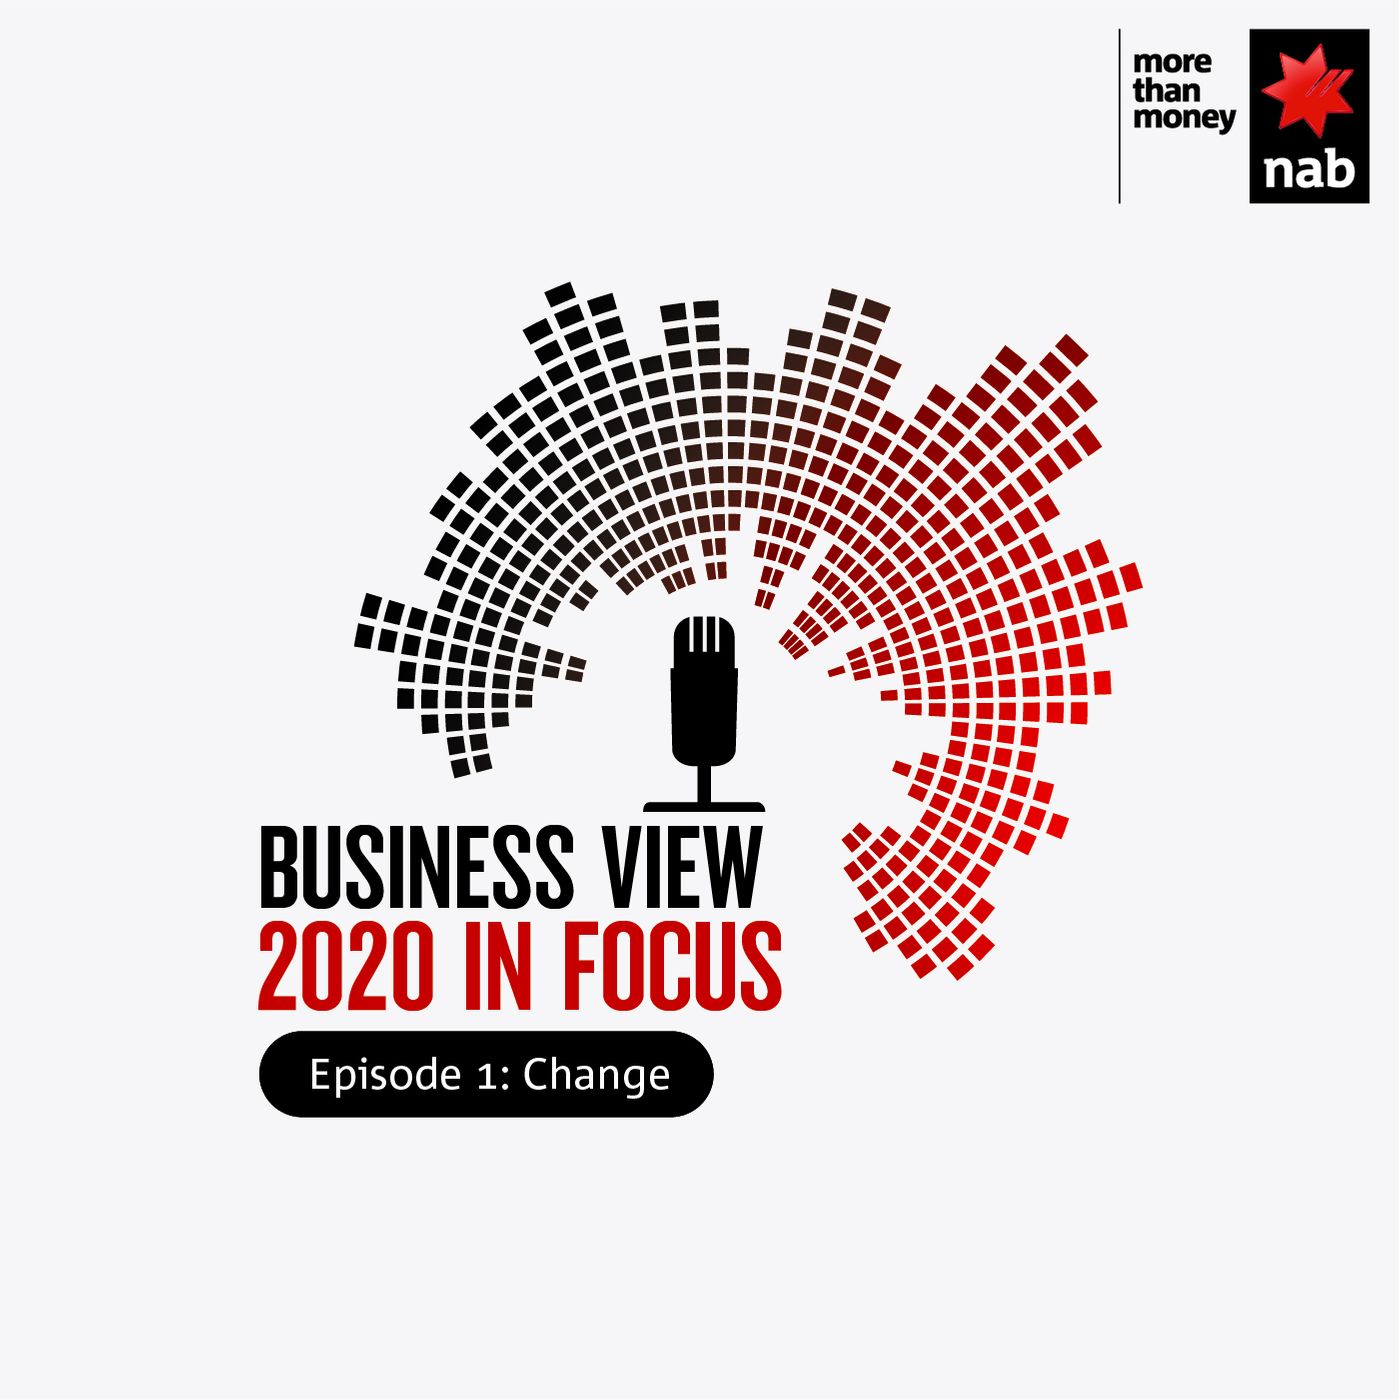 Business View 2020 In Focus Episode 1: Change